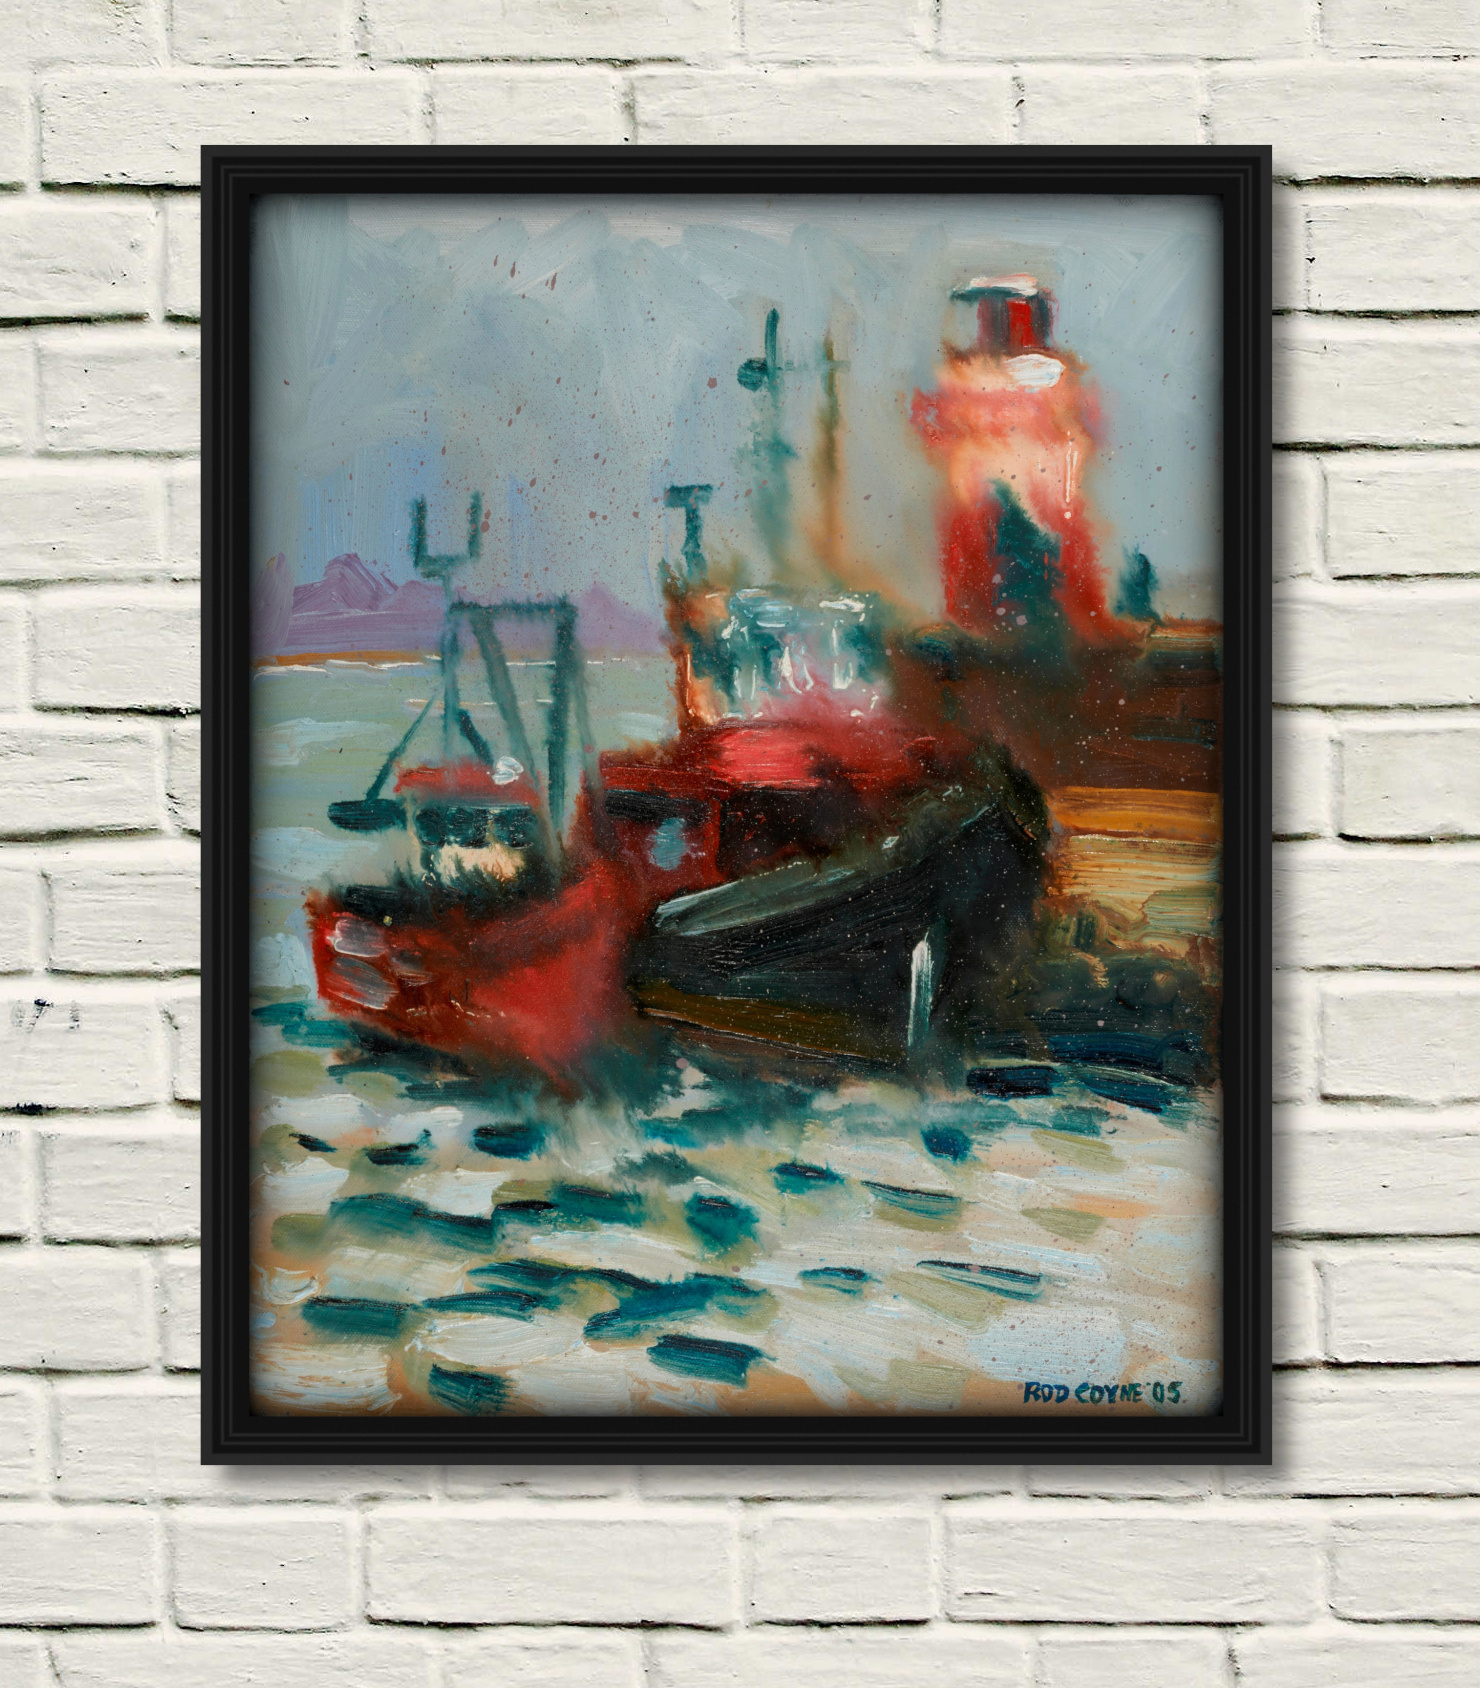 Artist Rod Coyne's painting Wicklow Trawlers Shelter is shown here in a black frame on a white wall